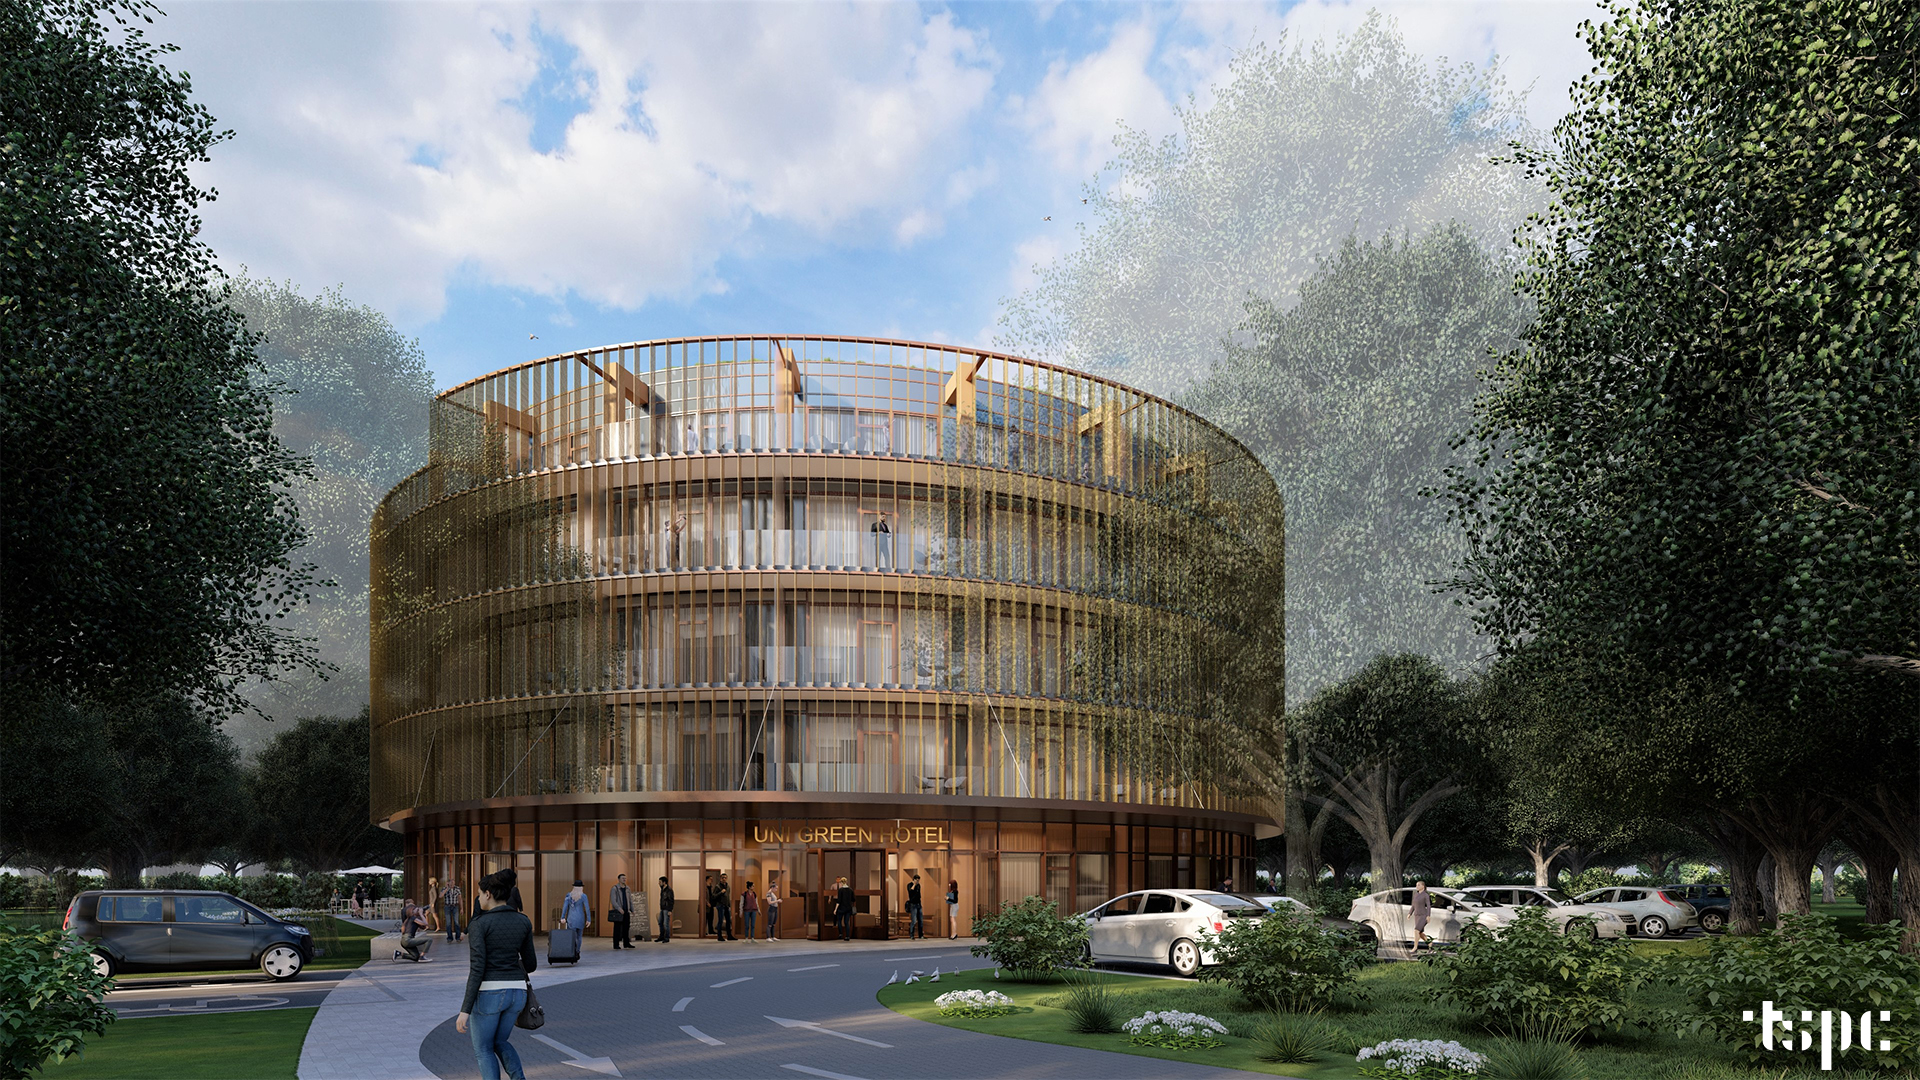 Classical shapes in the embrace of the forest: TSPC’s design of the UniGreen Hotel